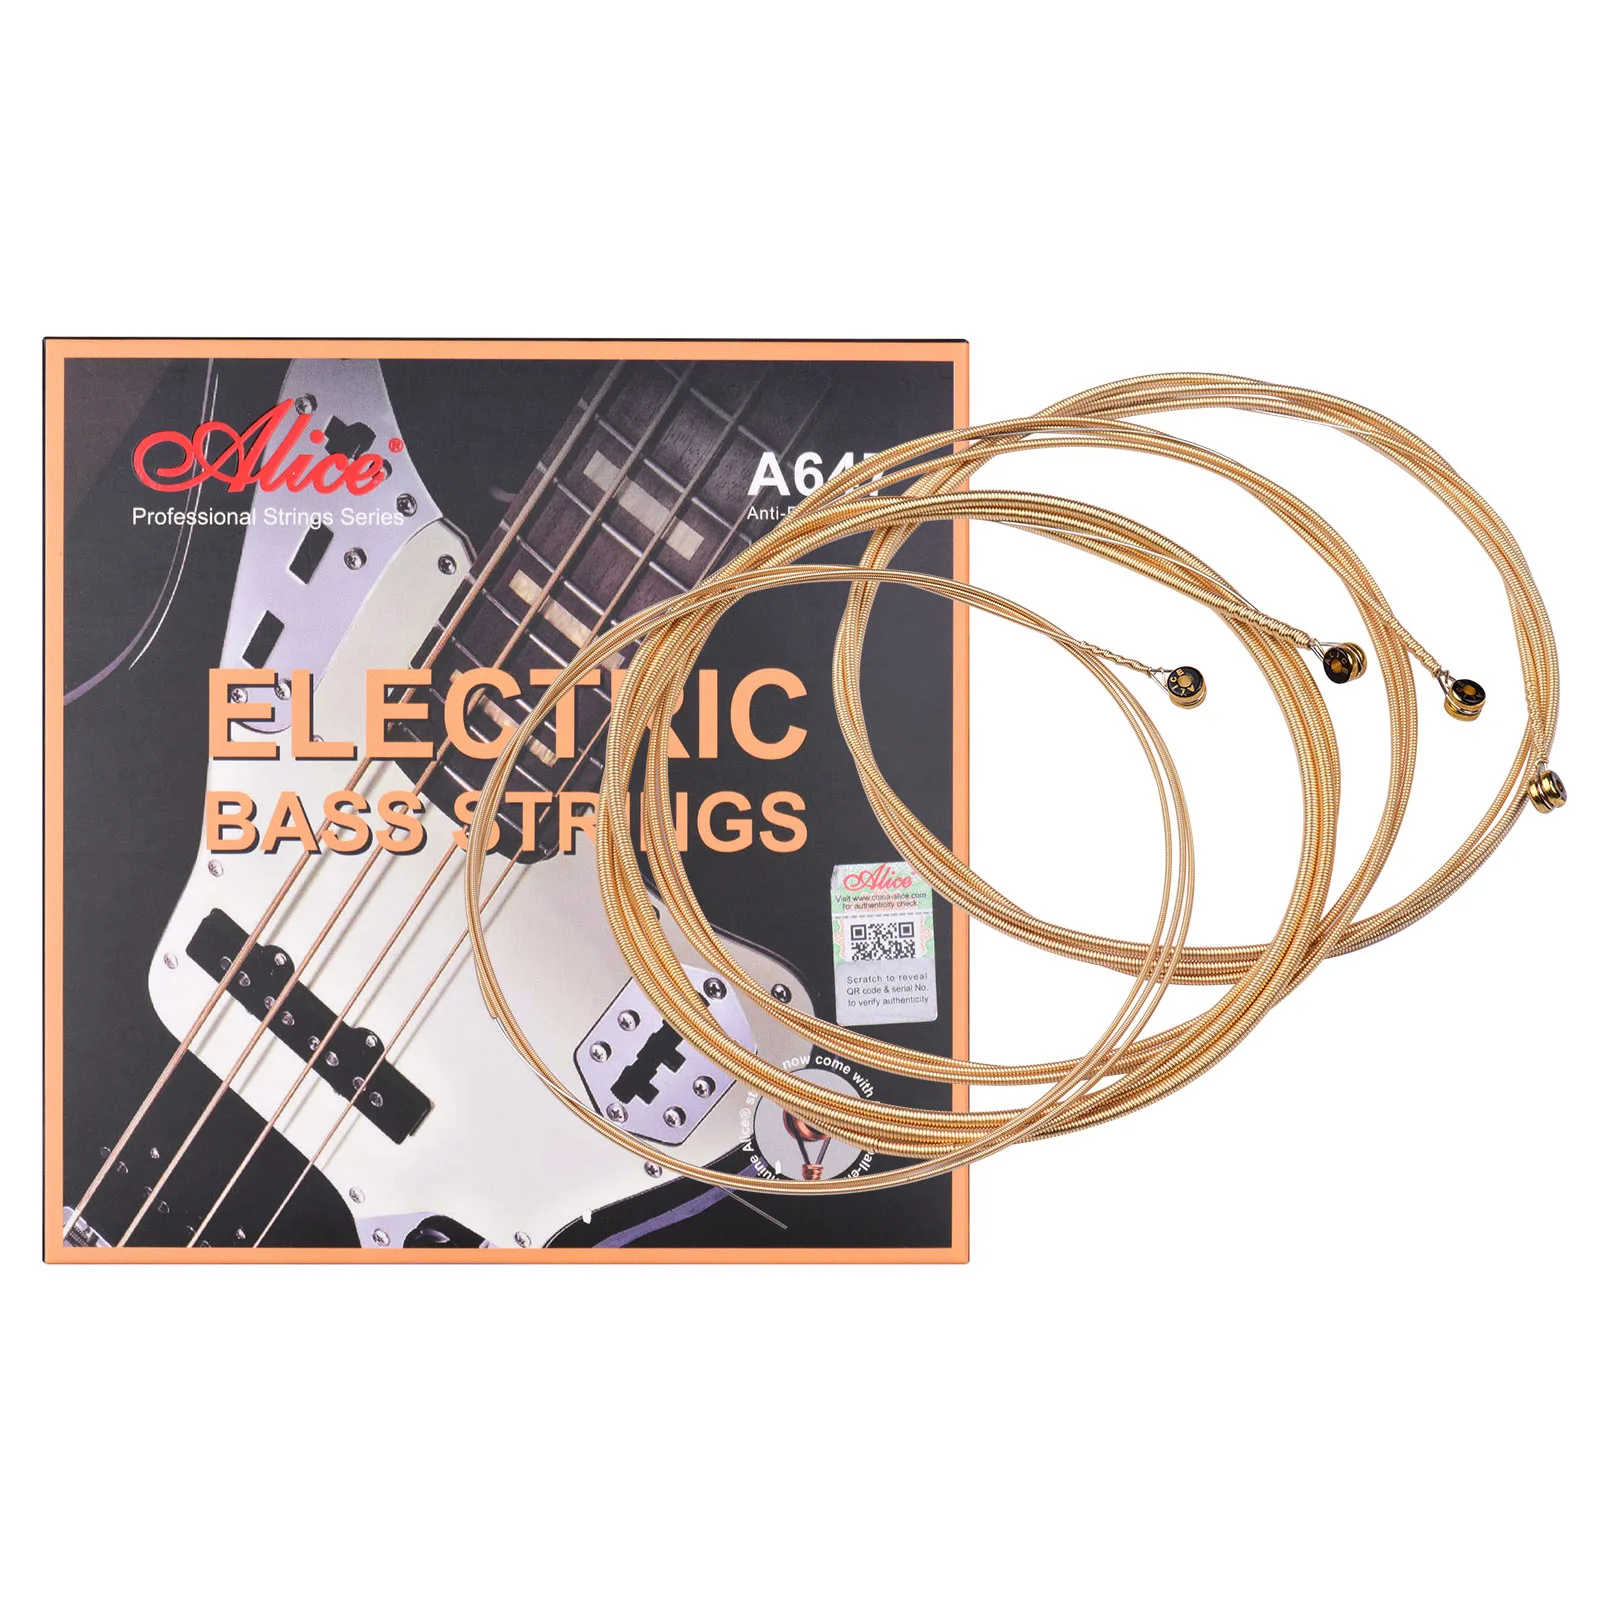 

Alice A647(4)-M Electric Bass Strings Hexagonal Core Bronze Iron Alloy Winding Strings for 4-String 22-24 Frets Electric Bass